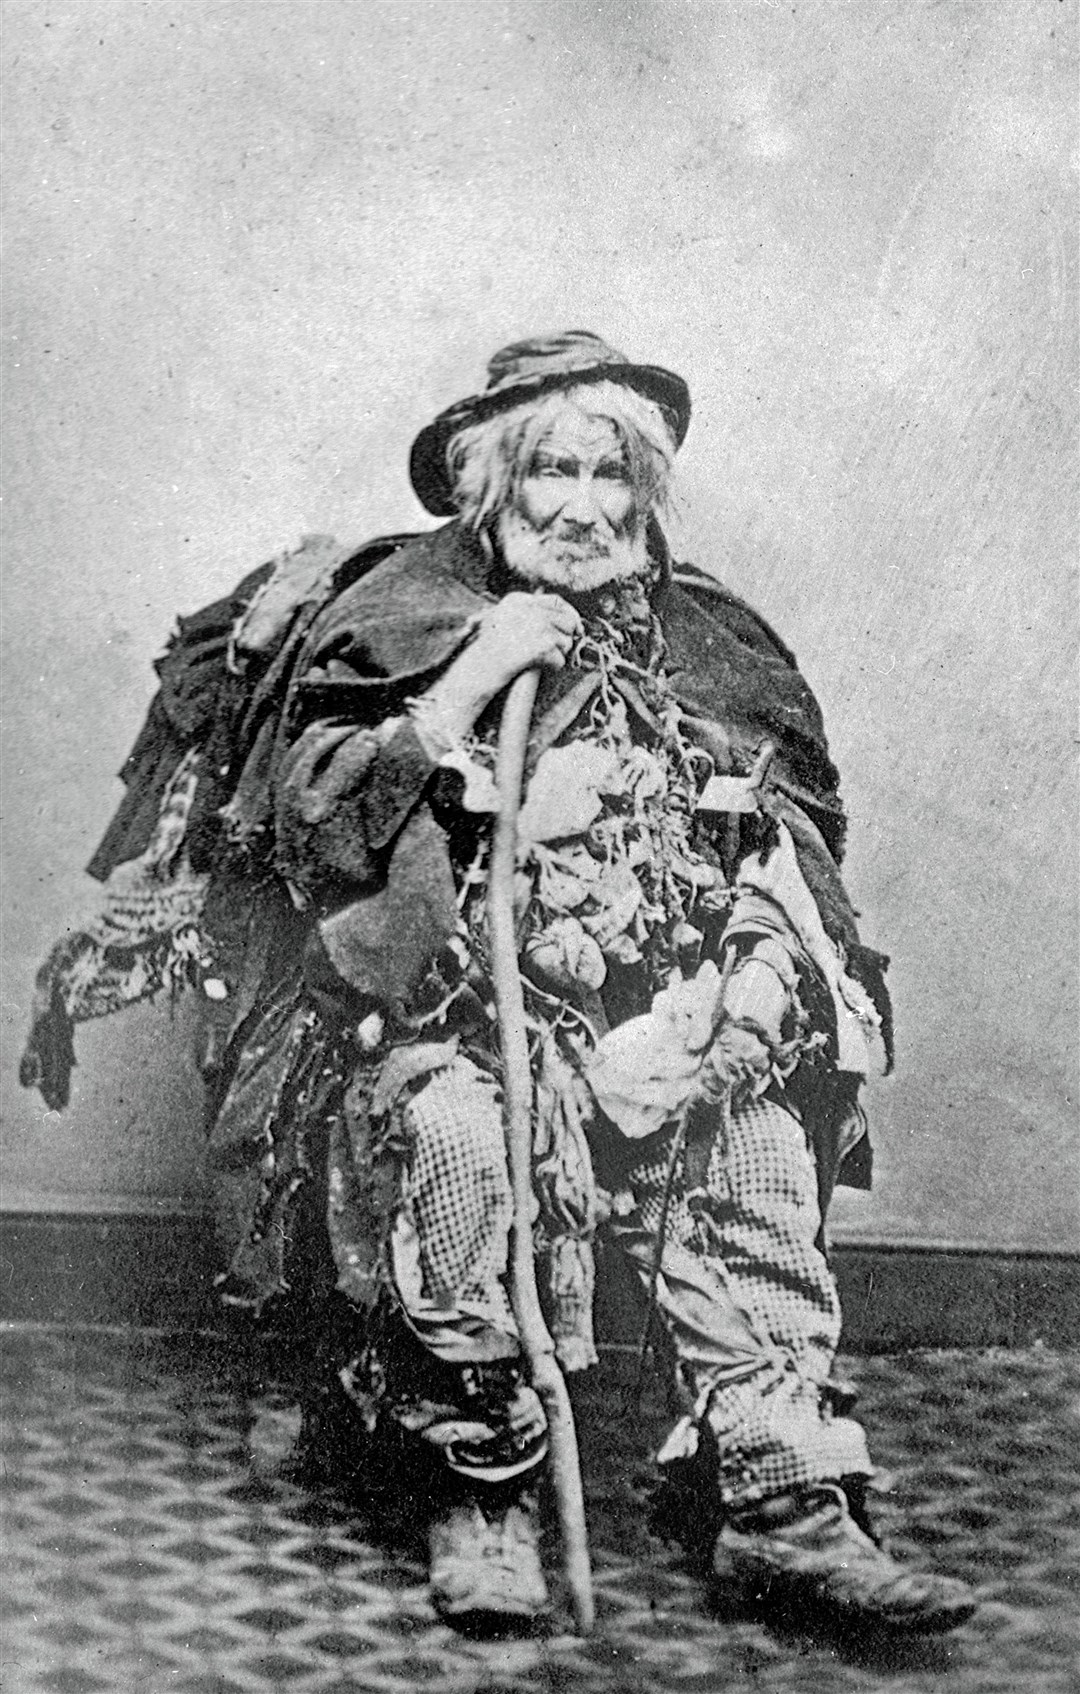 A photograph of The Ross-shire Wanderer, Fearchair A Ghuna (Farquhar of the Gun). Image courtesy of the Joseph Cook Collection, Inverness Museum & Art Gallery, High Life Highland.